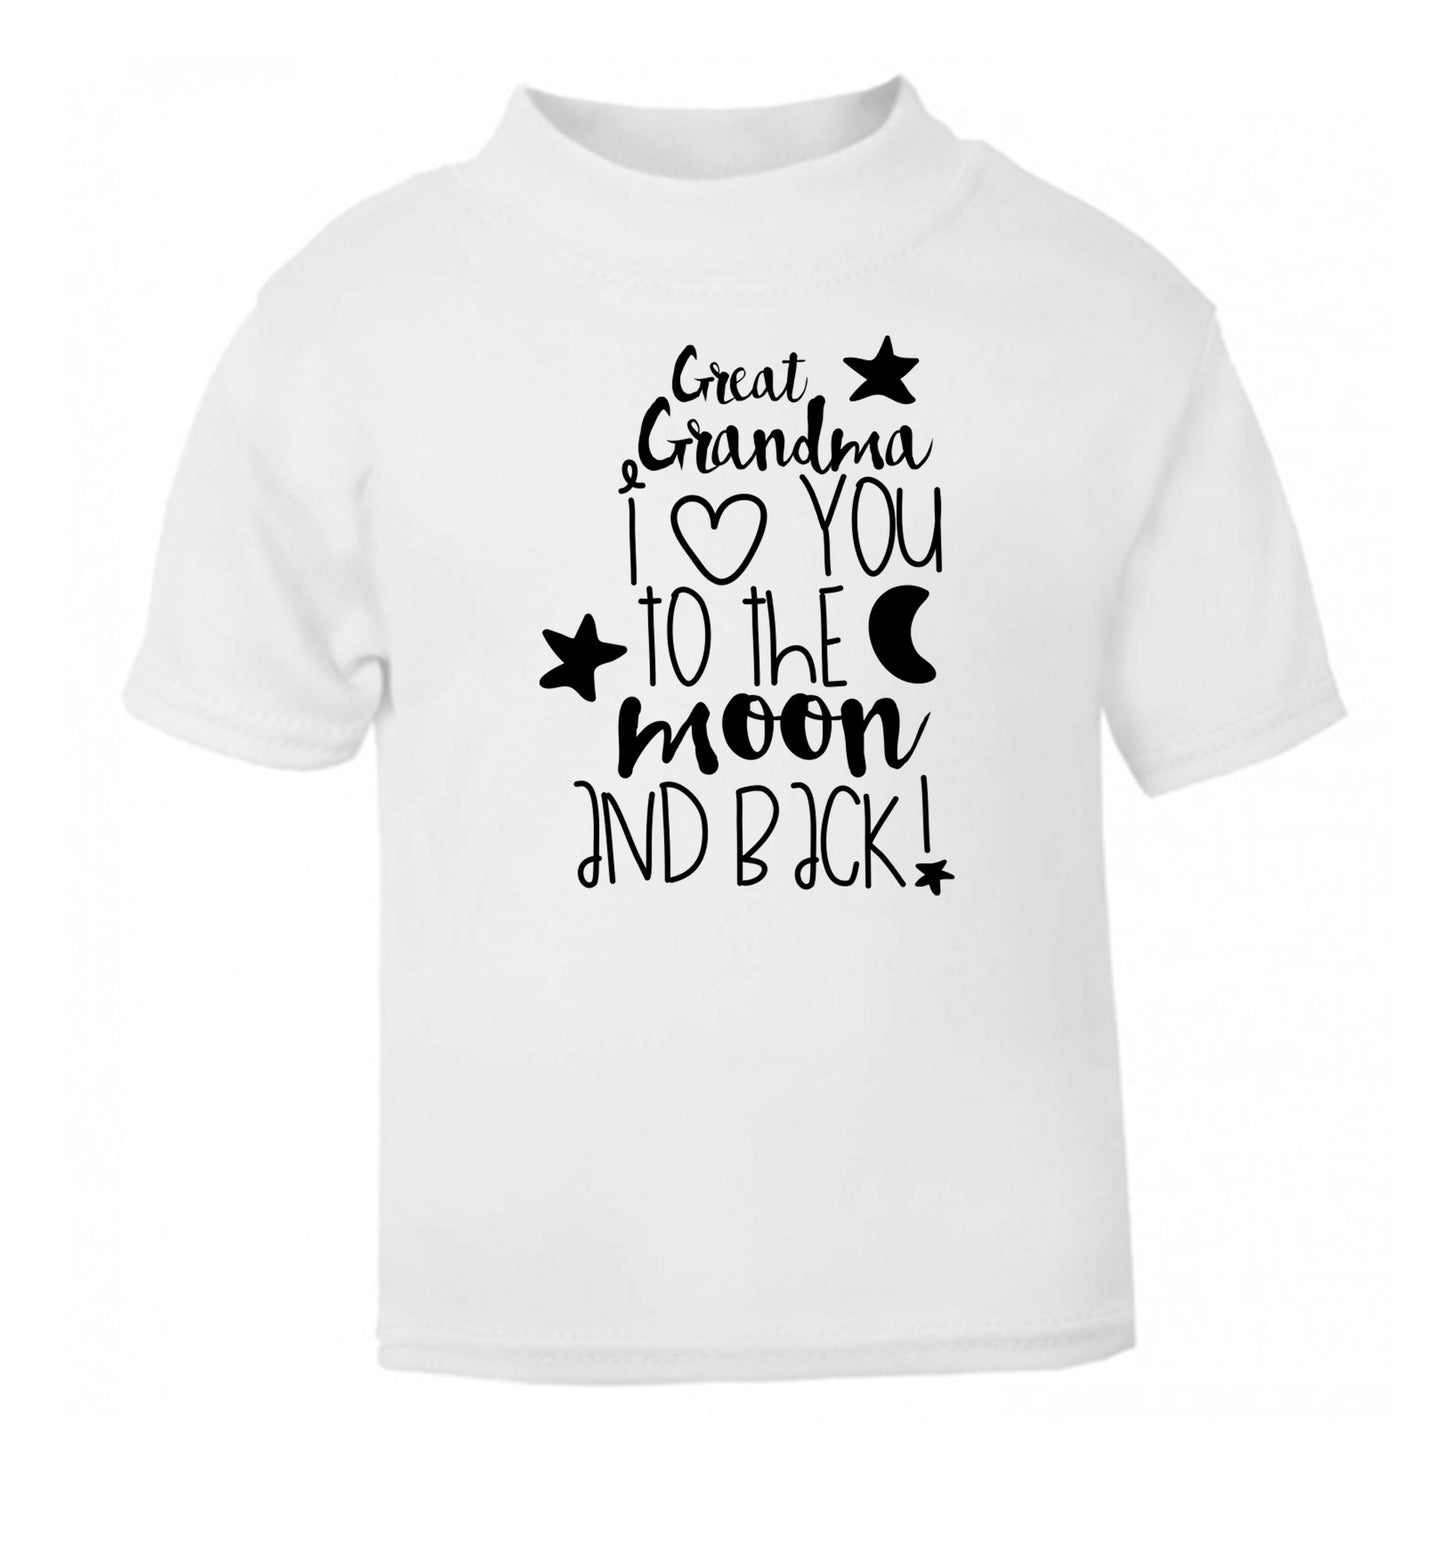 Great Grandma I love you to the moon and back white Baby Toddler Tshirt 2 Years